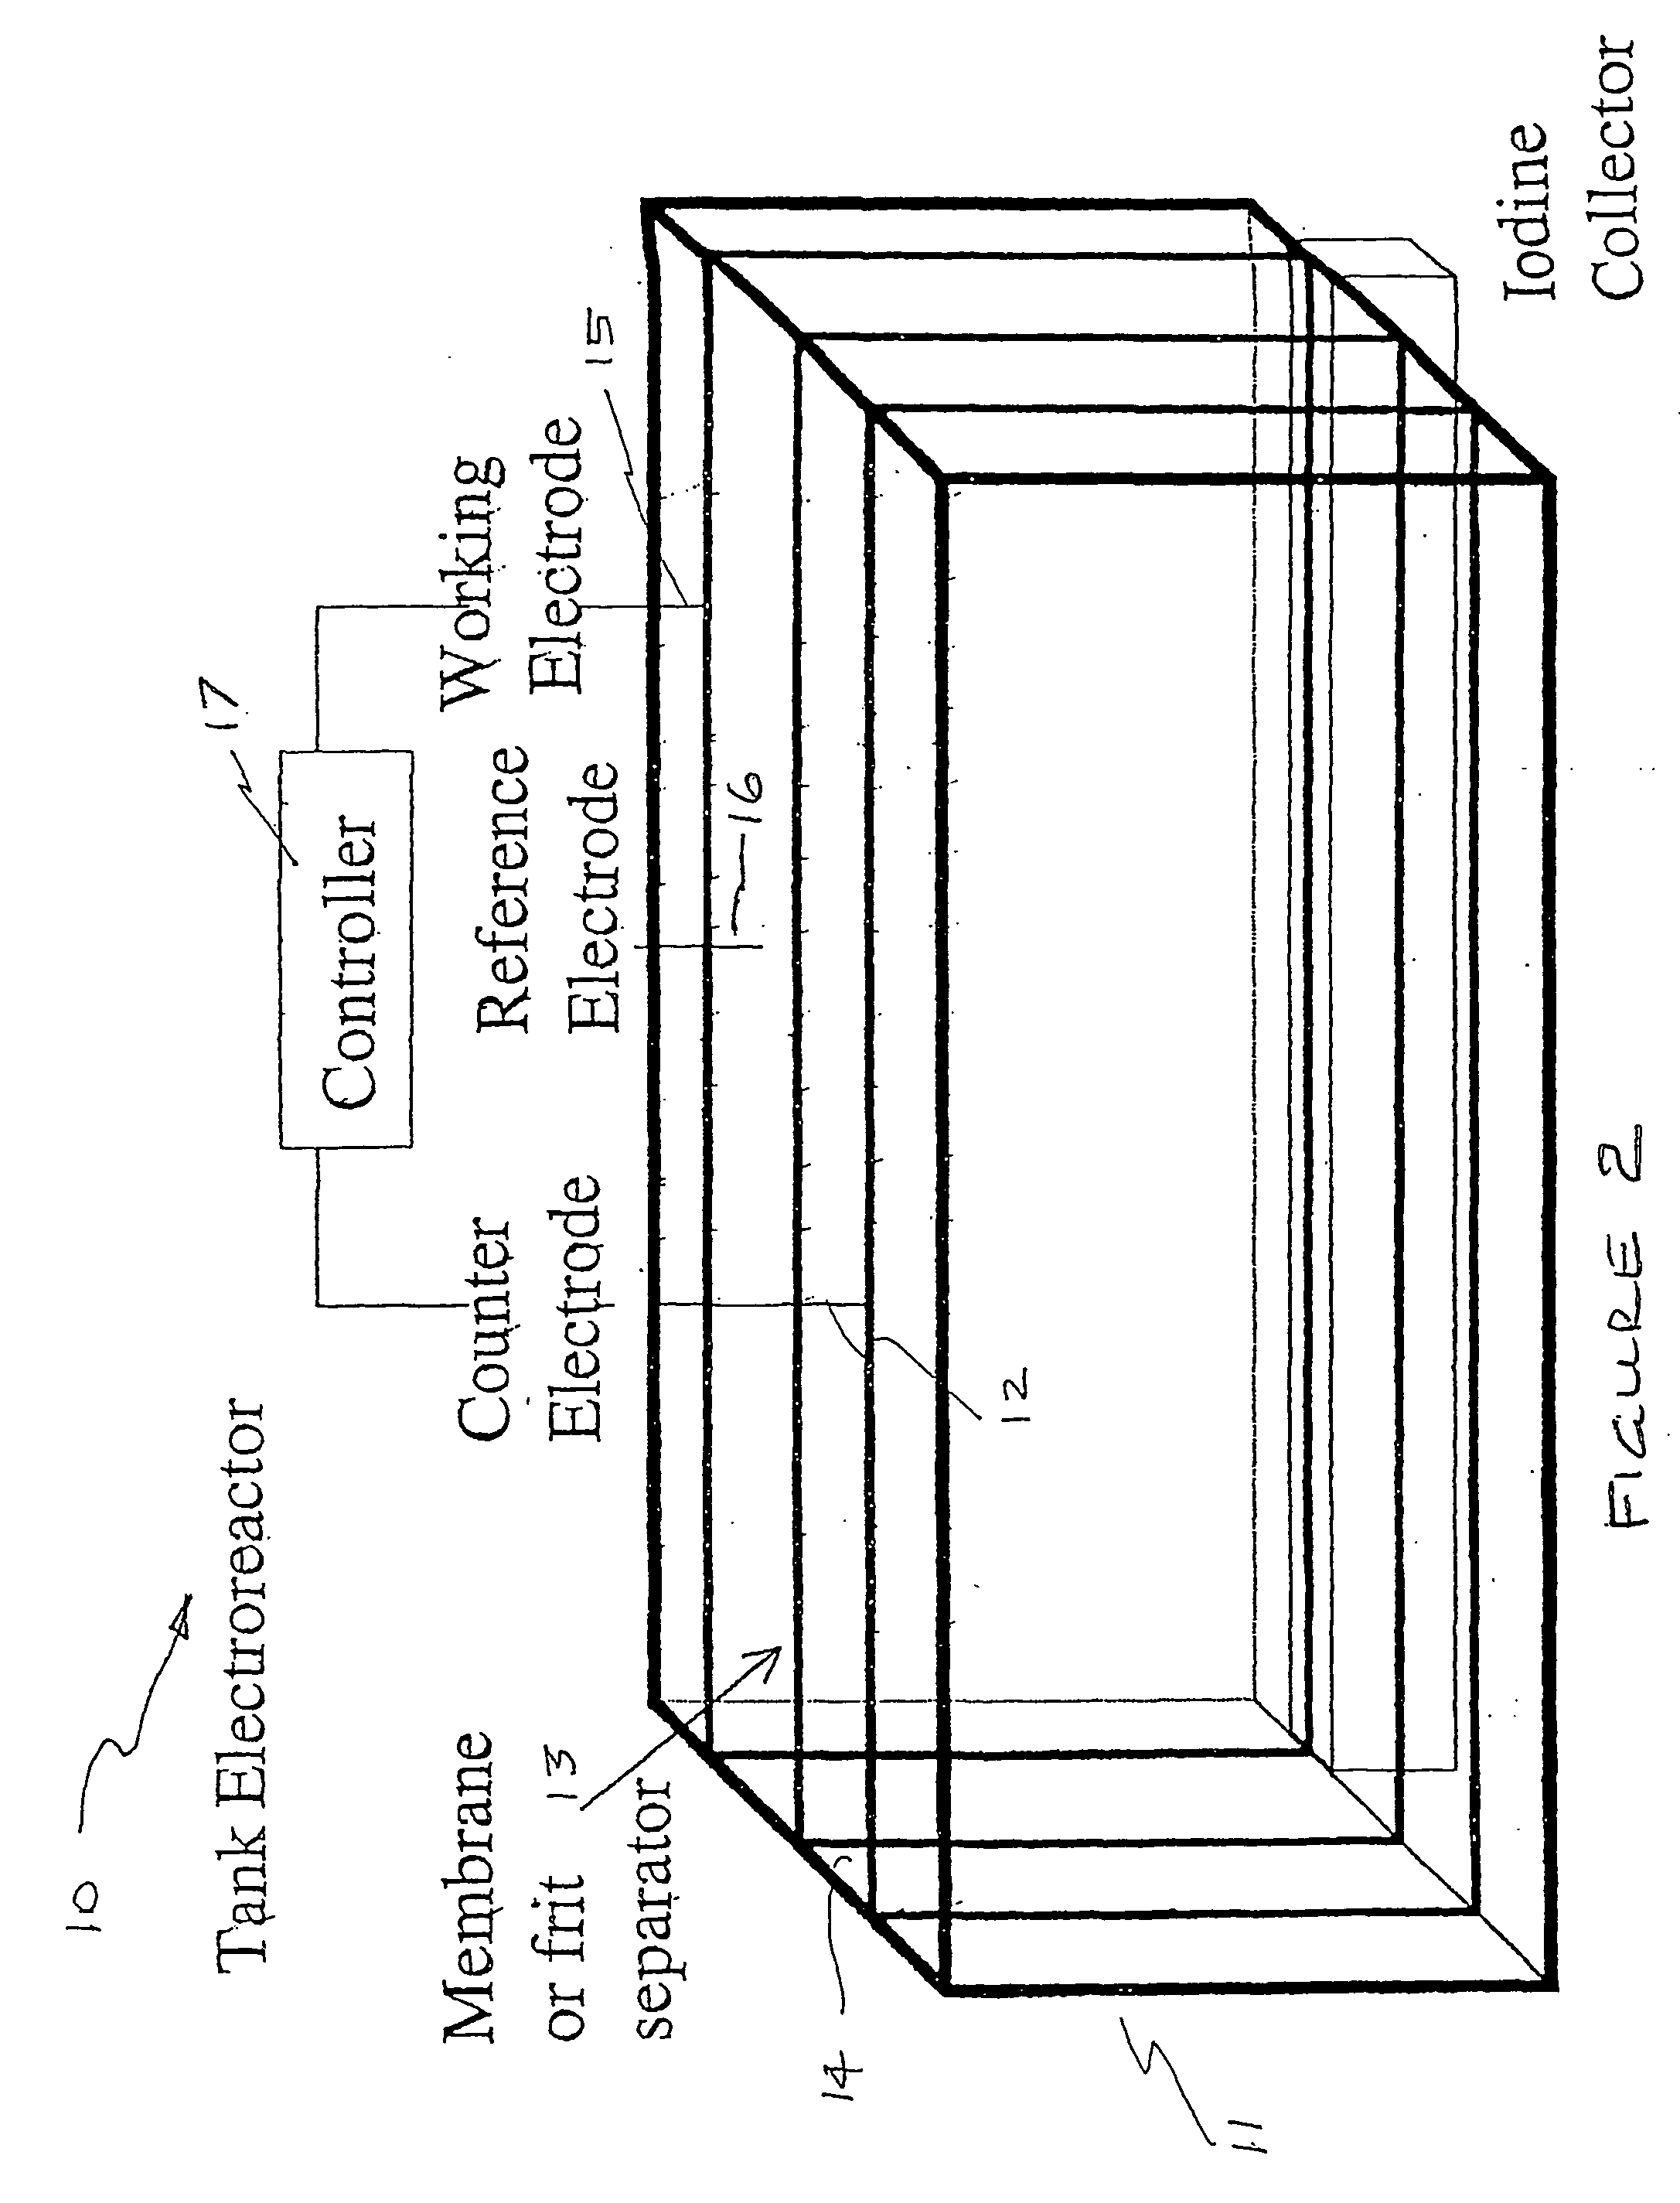 Process and method for recovery of halogens